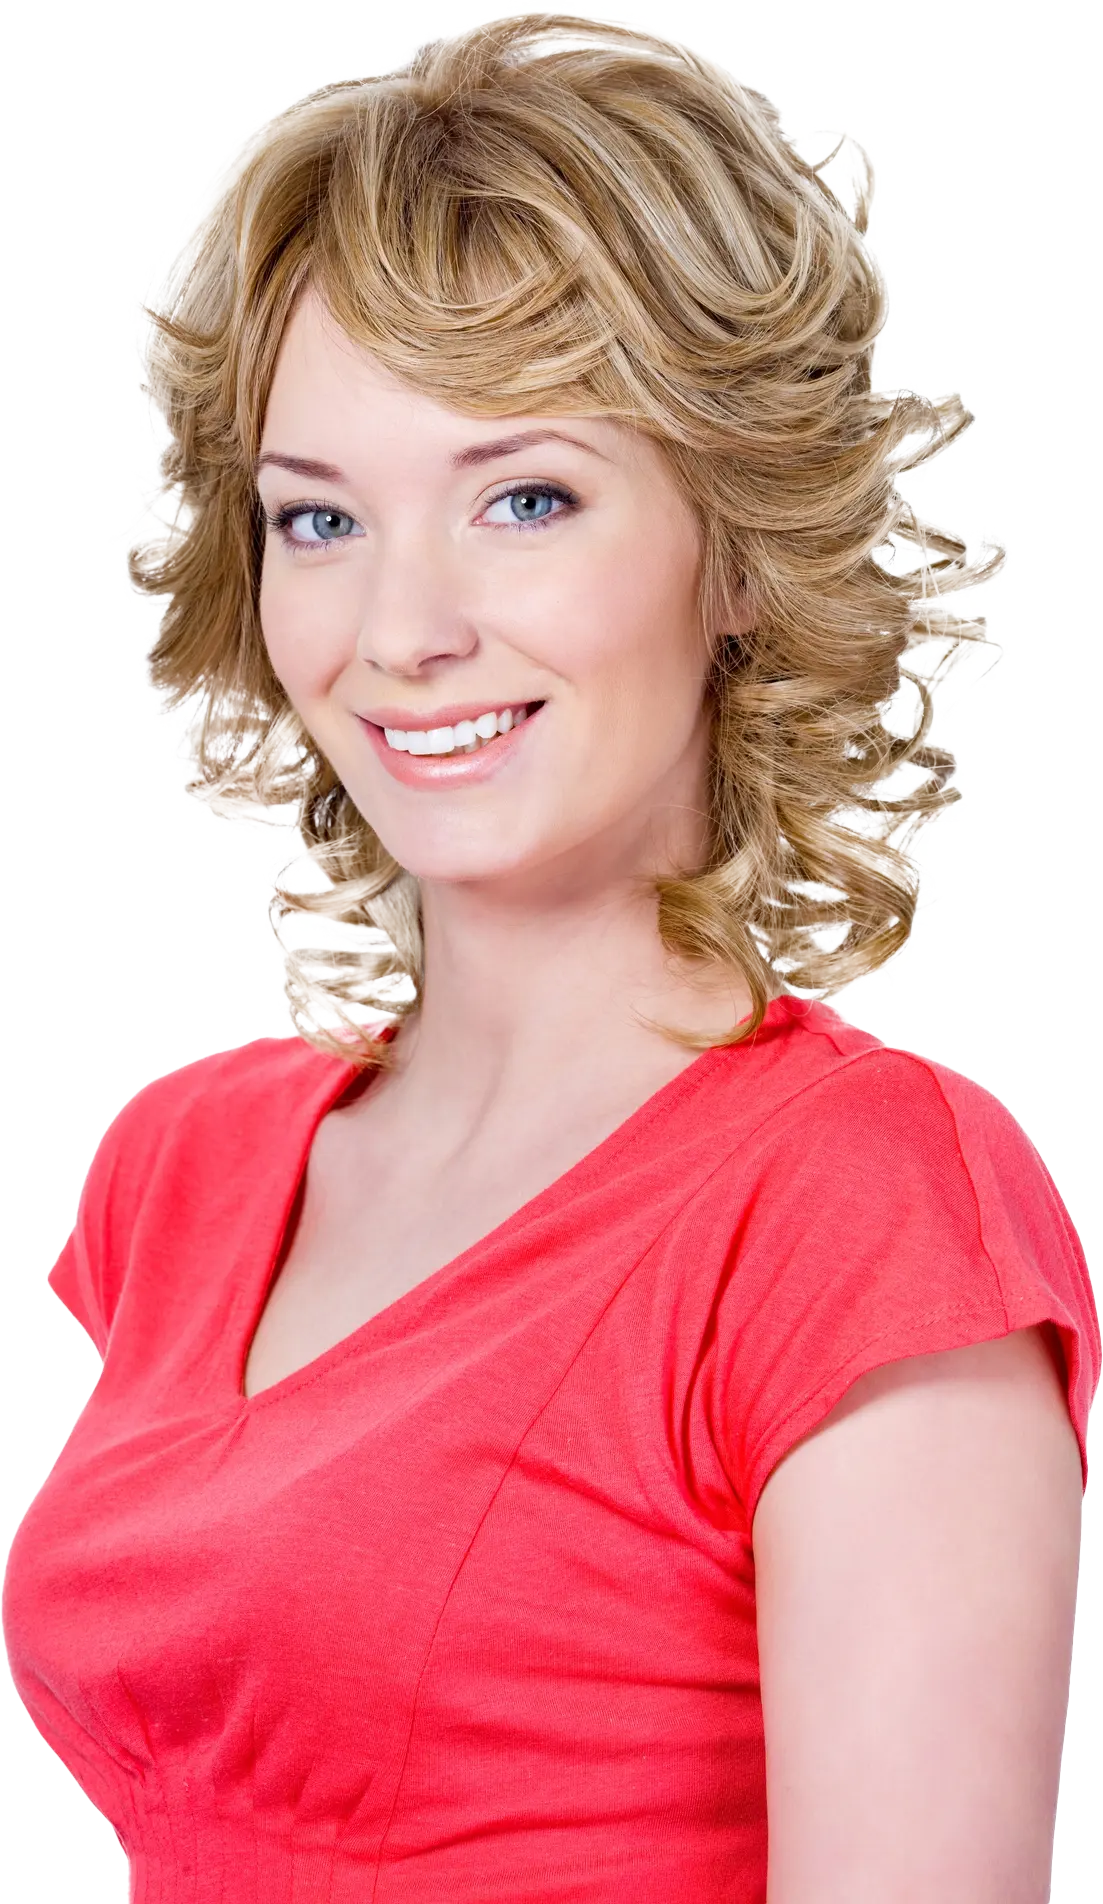 portrait-beautiful-smiling-young-woman-red-with-curly-blonde-hair